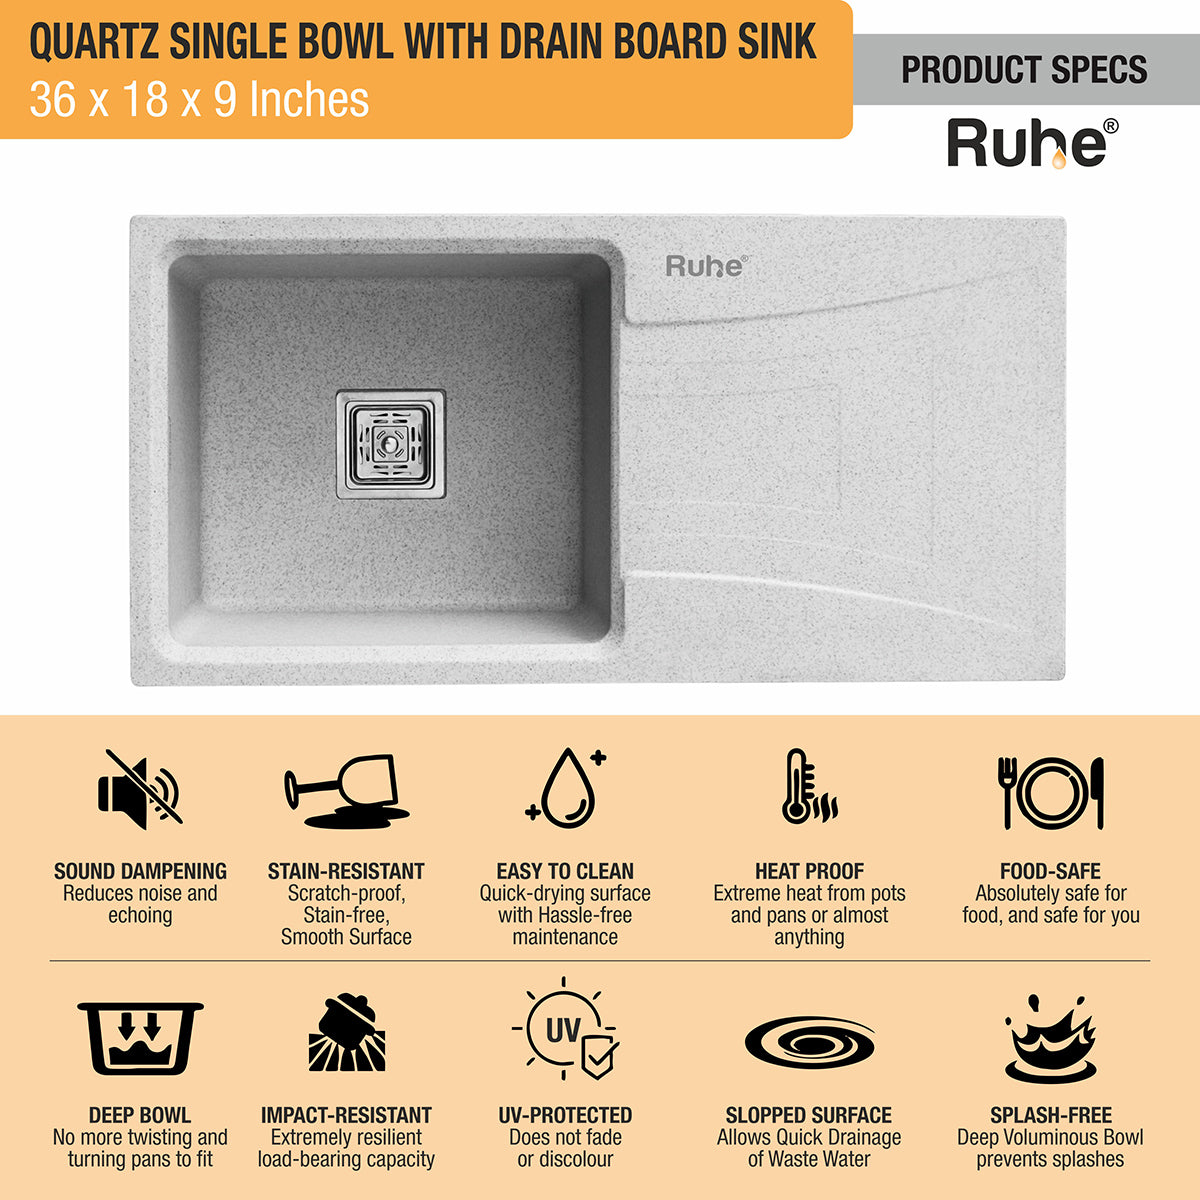 Quartz Single Bowl Sand Pluto Kitchen Sink with Drainboard(36 x 18 x 9 inches) features and benefits